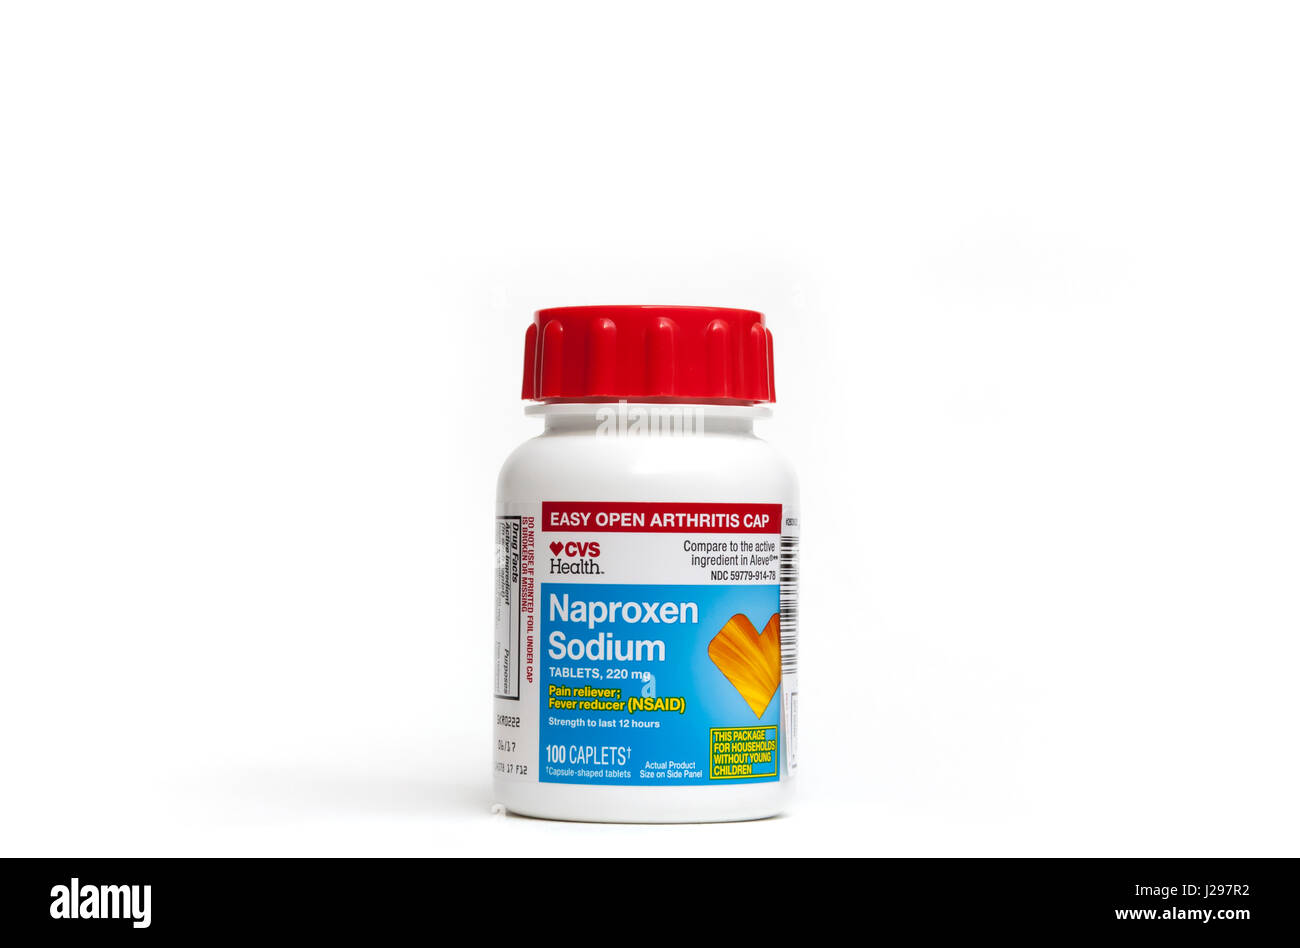 Naproxen sodium, a CVS store brand generic alternative to the more expensive  brand name Aleve, bottle with easy open arthritis cap. Stock Photo